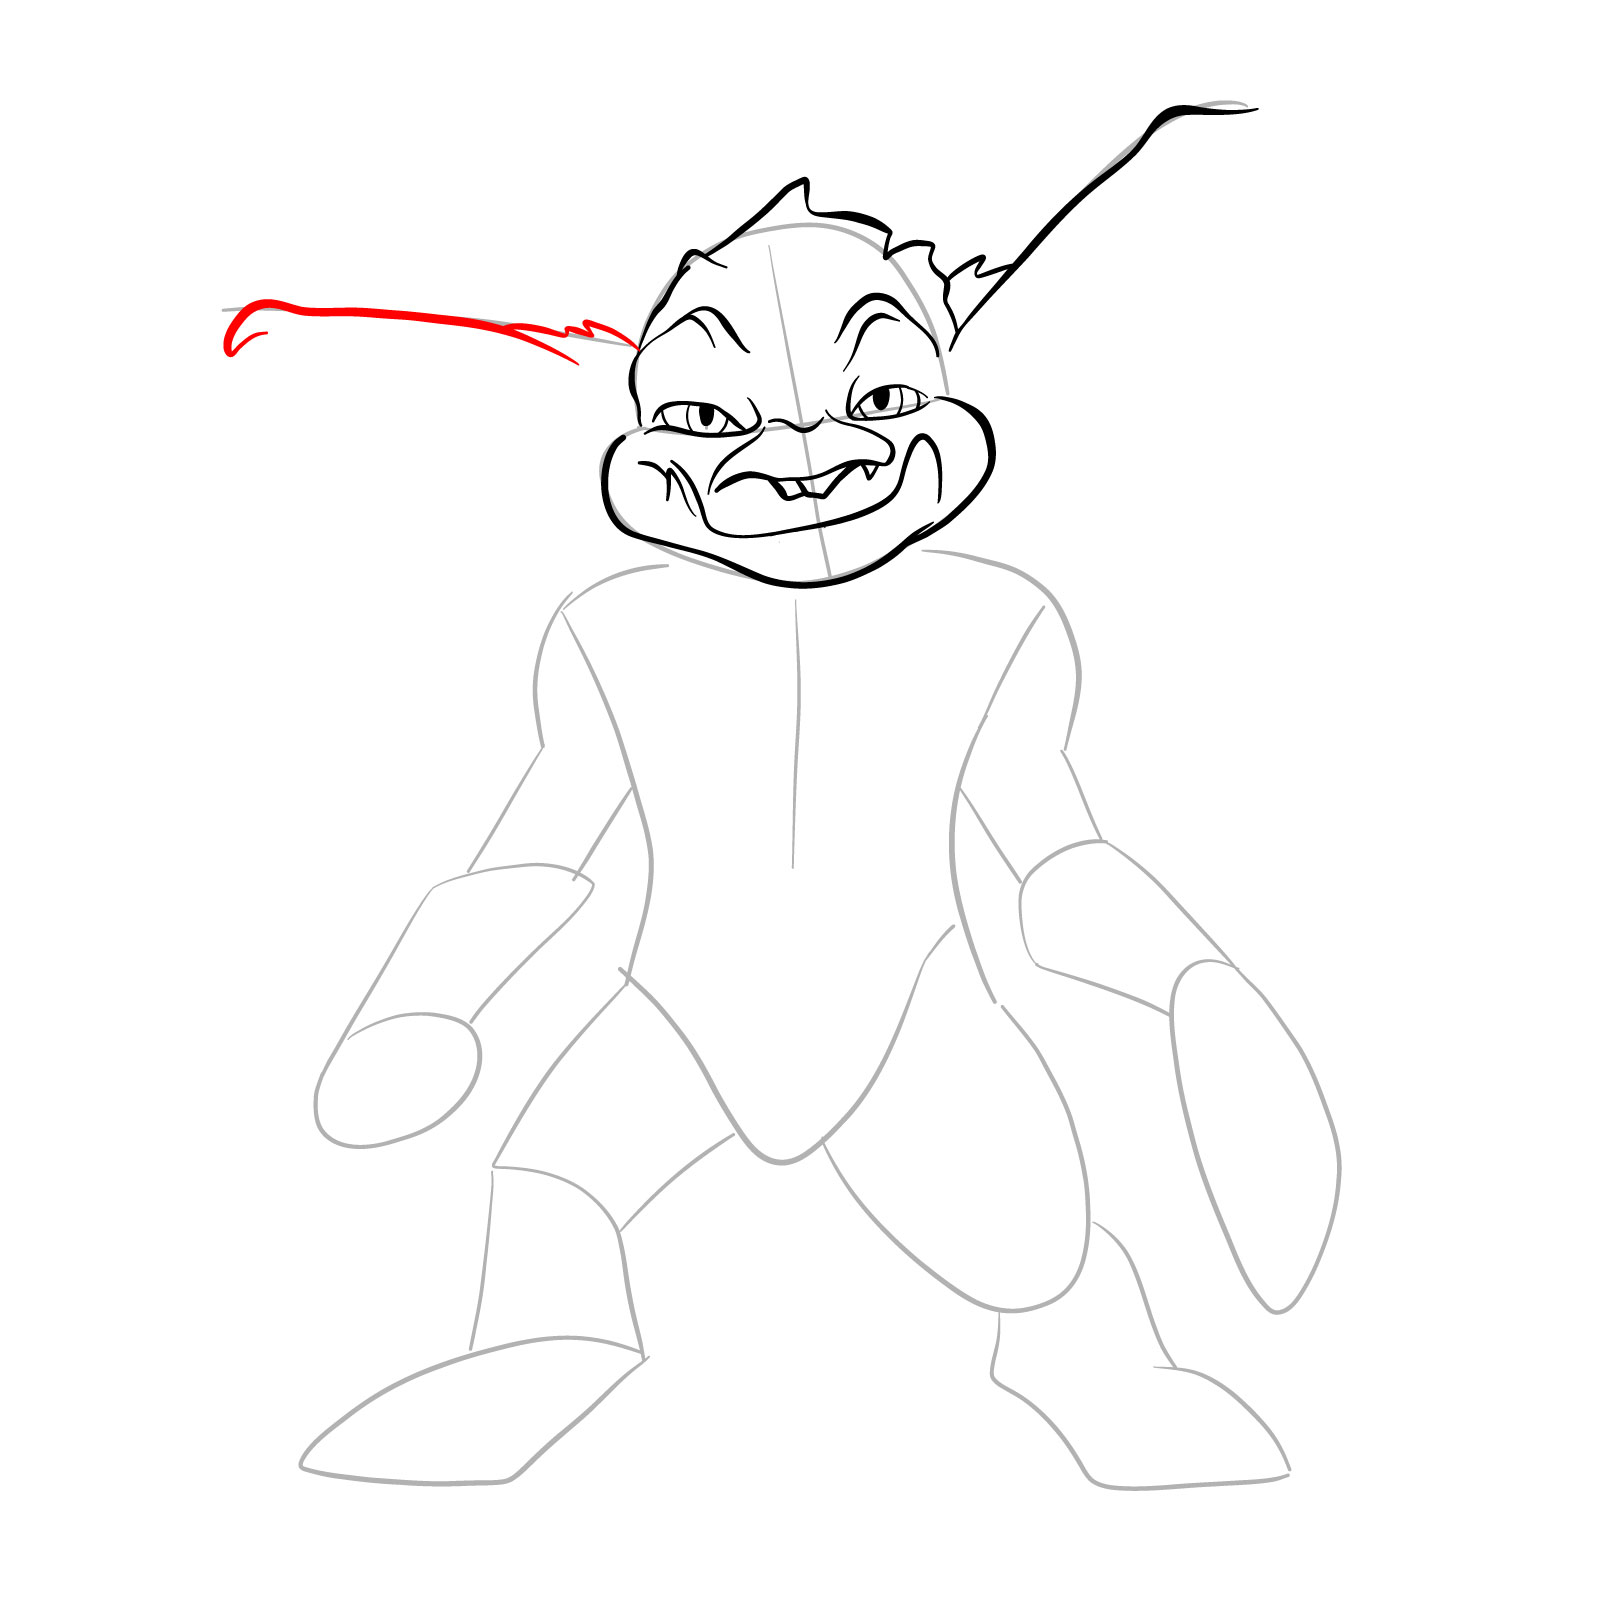 How to draw a Goblin - step 12